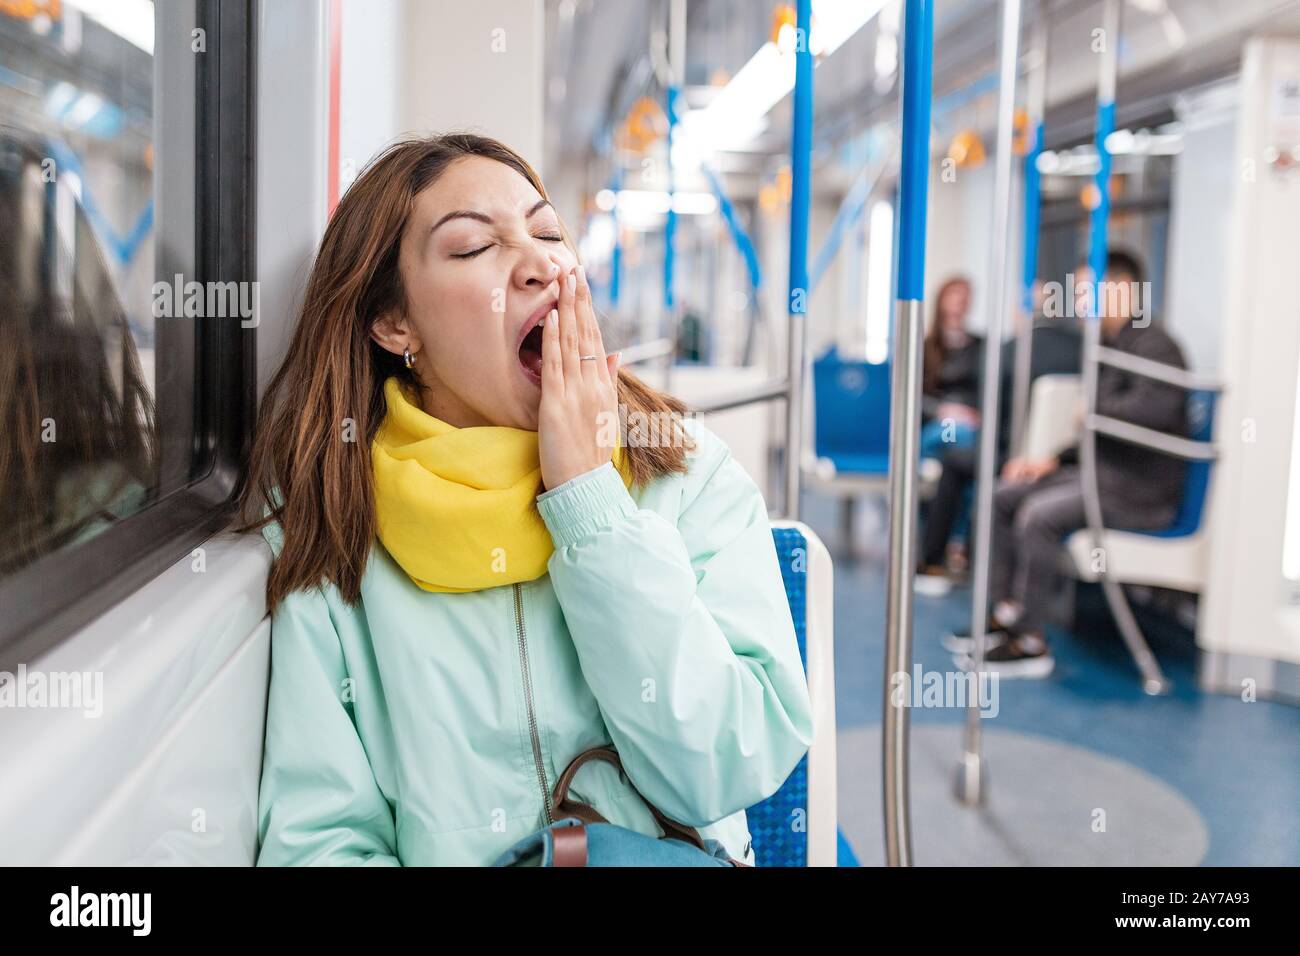 The girl suffering from insomnia sleeps or taking a nap in the subway while tired goes home from work Stock Photo